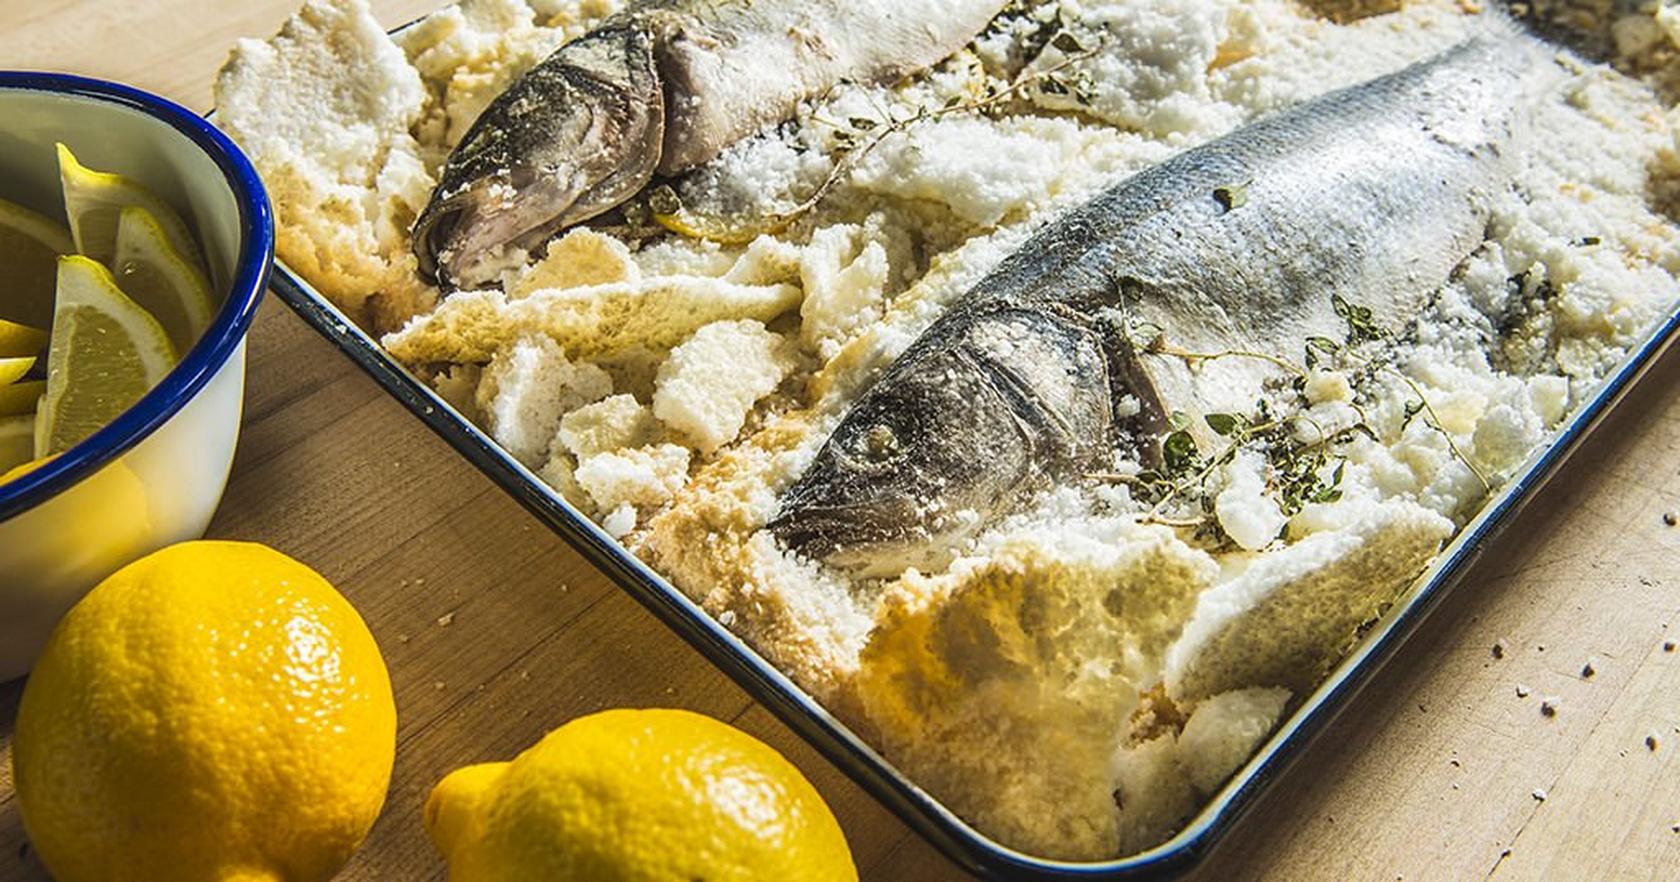 Baked Whole Fish in Sea Salt